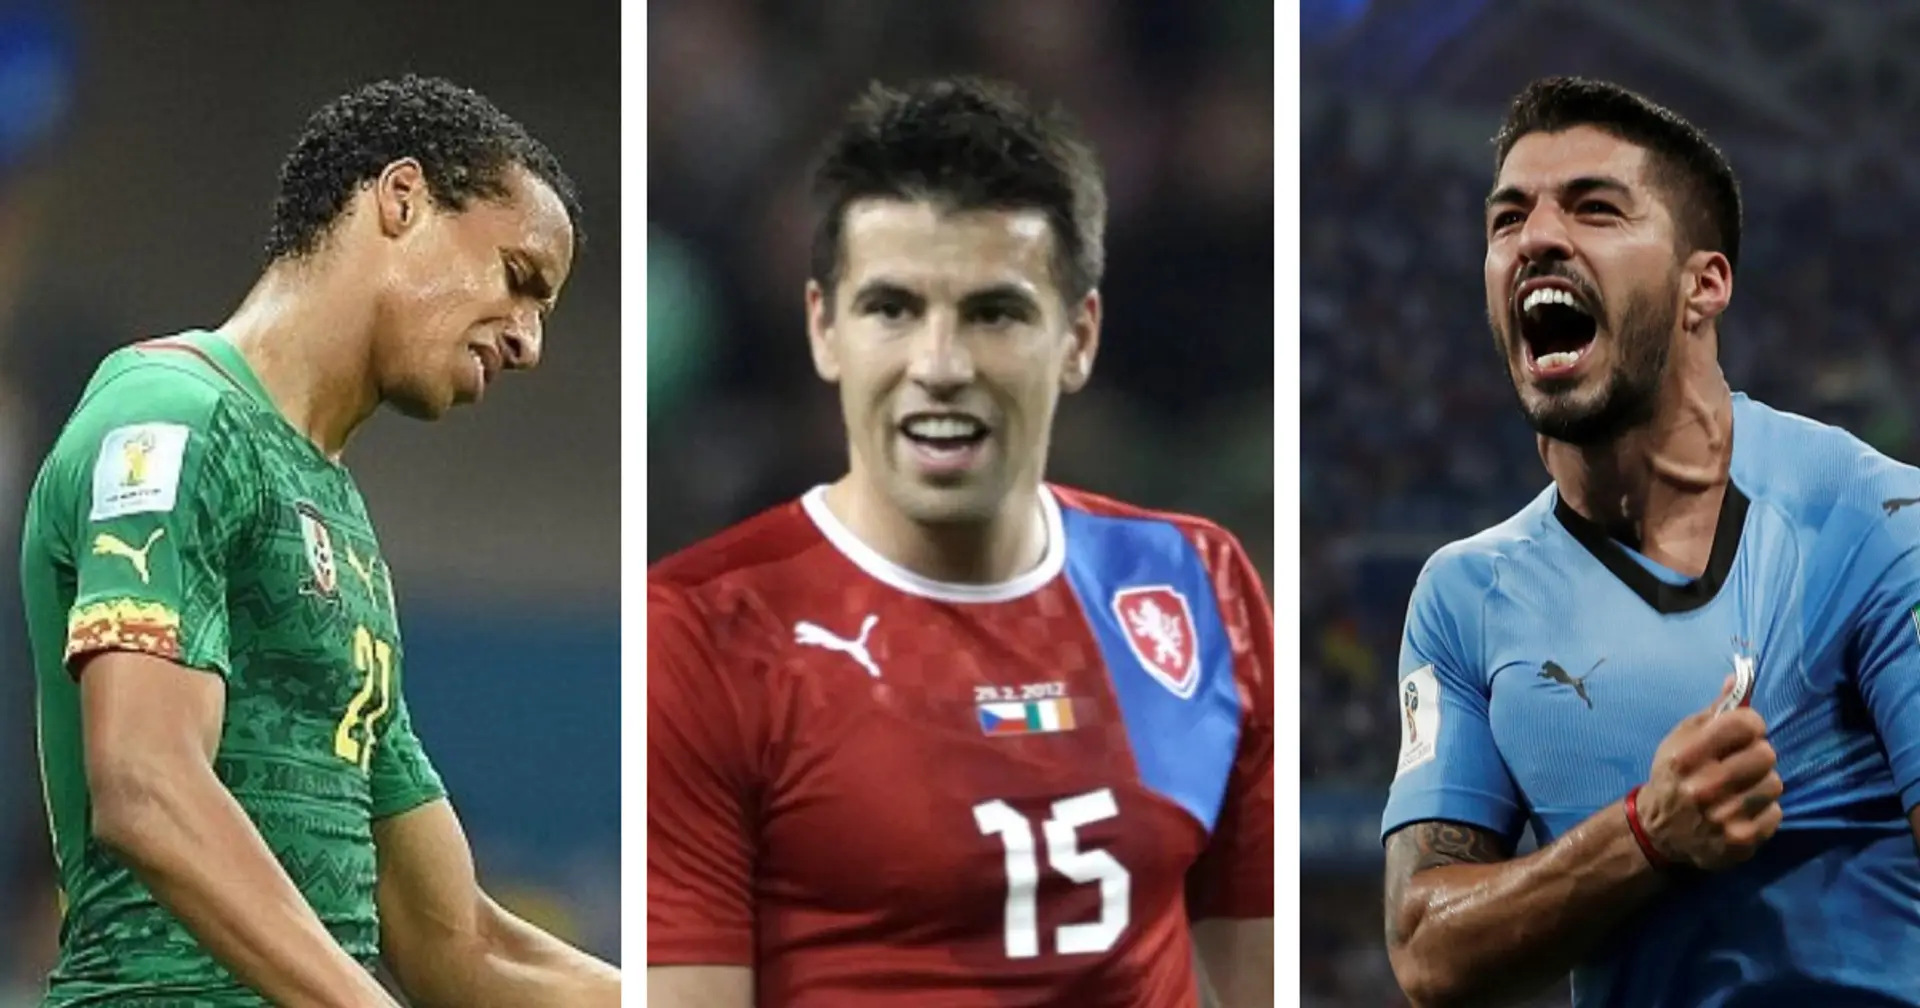 Joel Matip retired just in time: 5 traditionally big football-crazy nations that are in massive decline